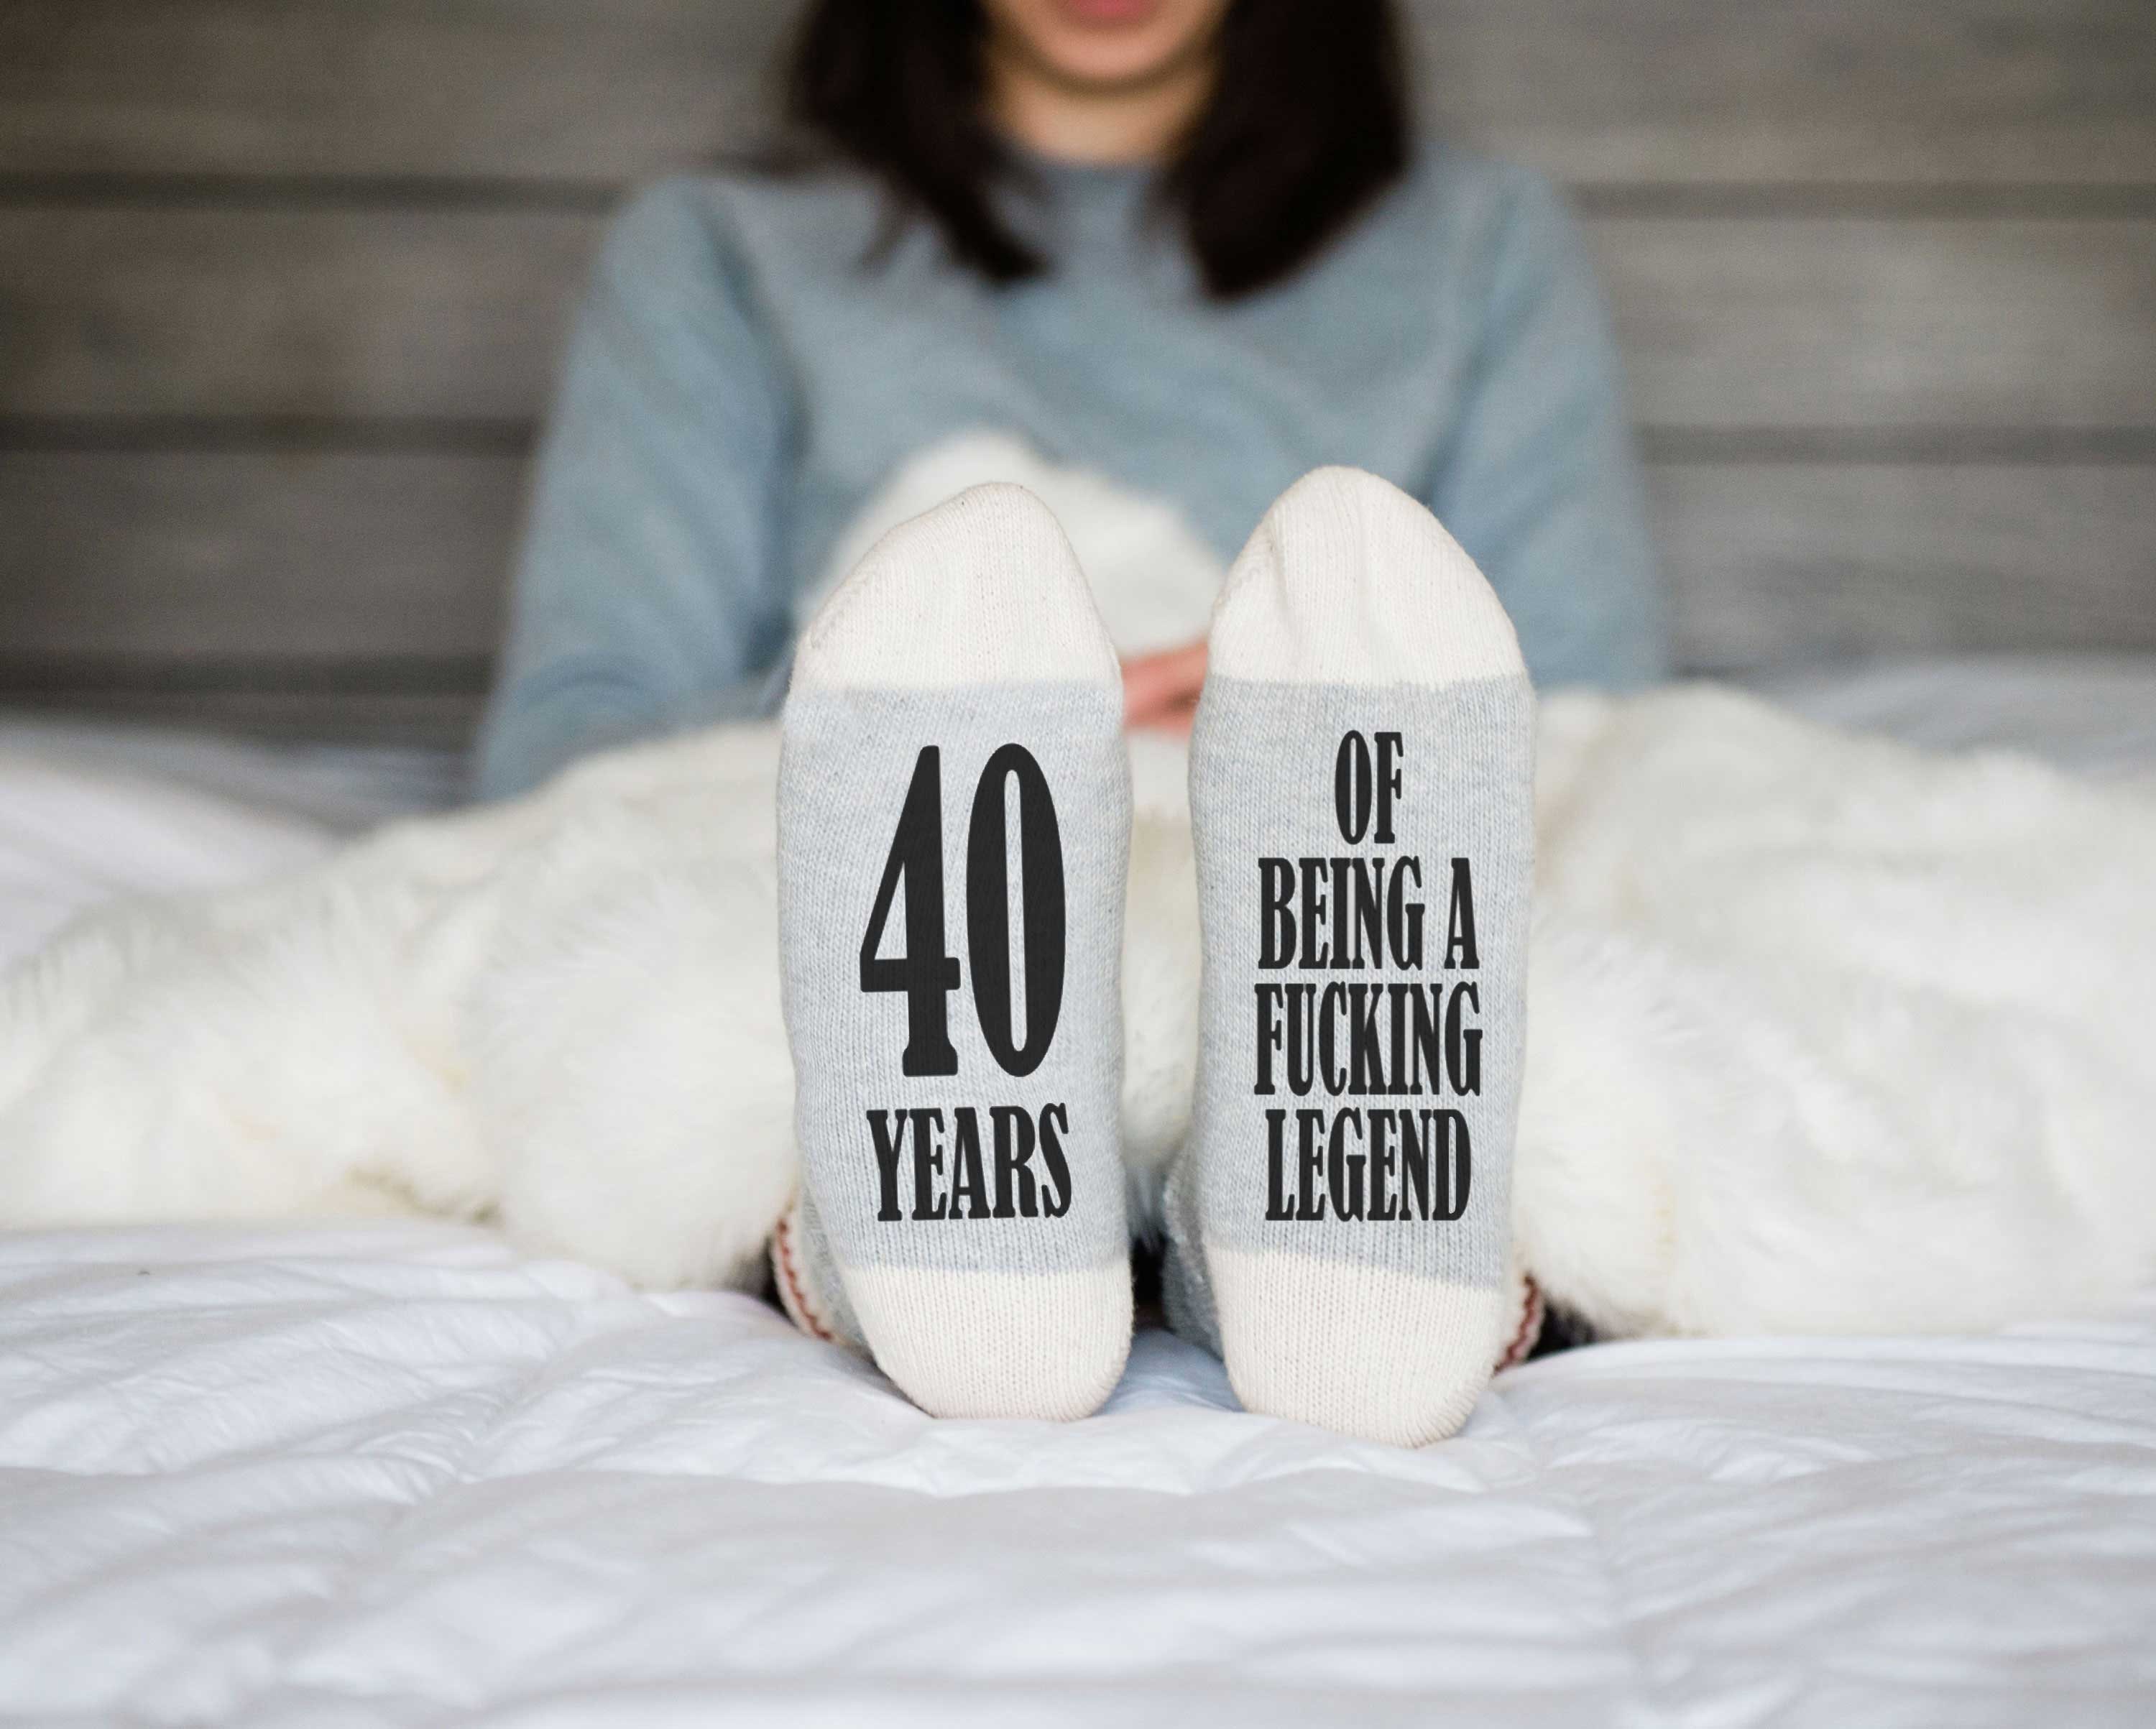 40+ Funny Gift Ideas - Hilarious Gifts for Friends 2020